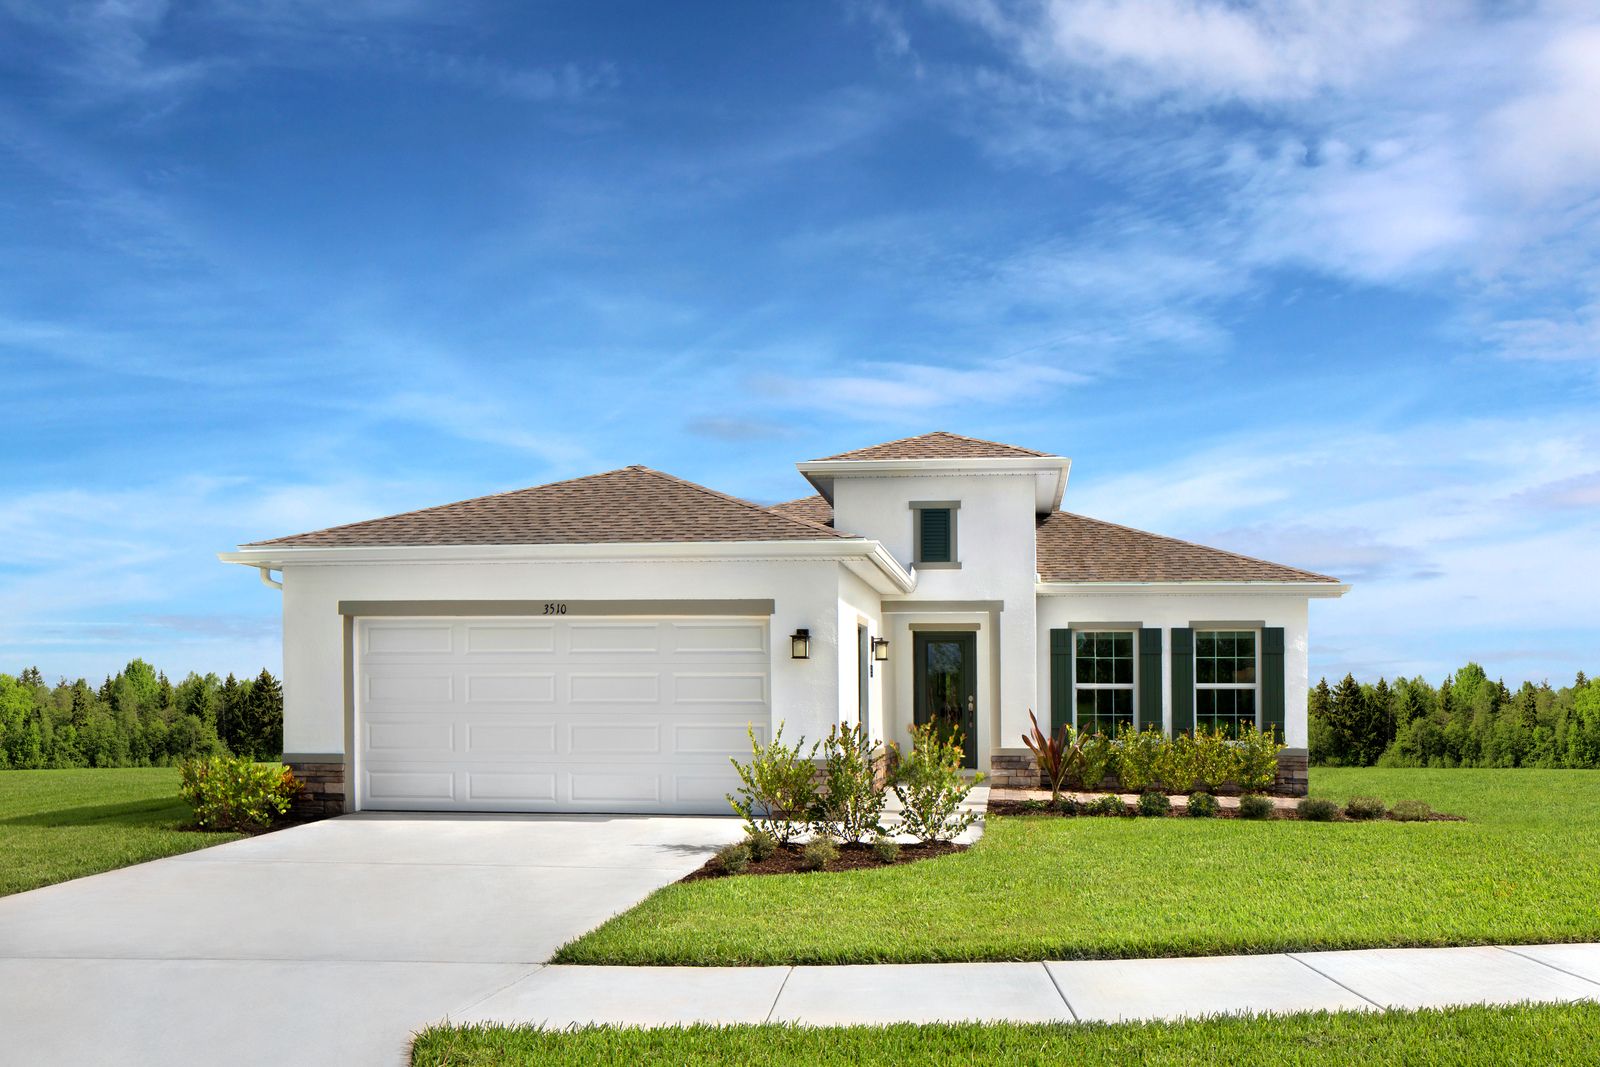 Final Home | Key Largo Available for Immediate Delivery